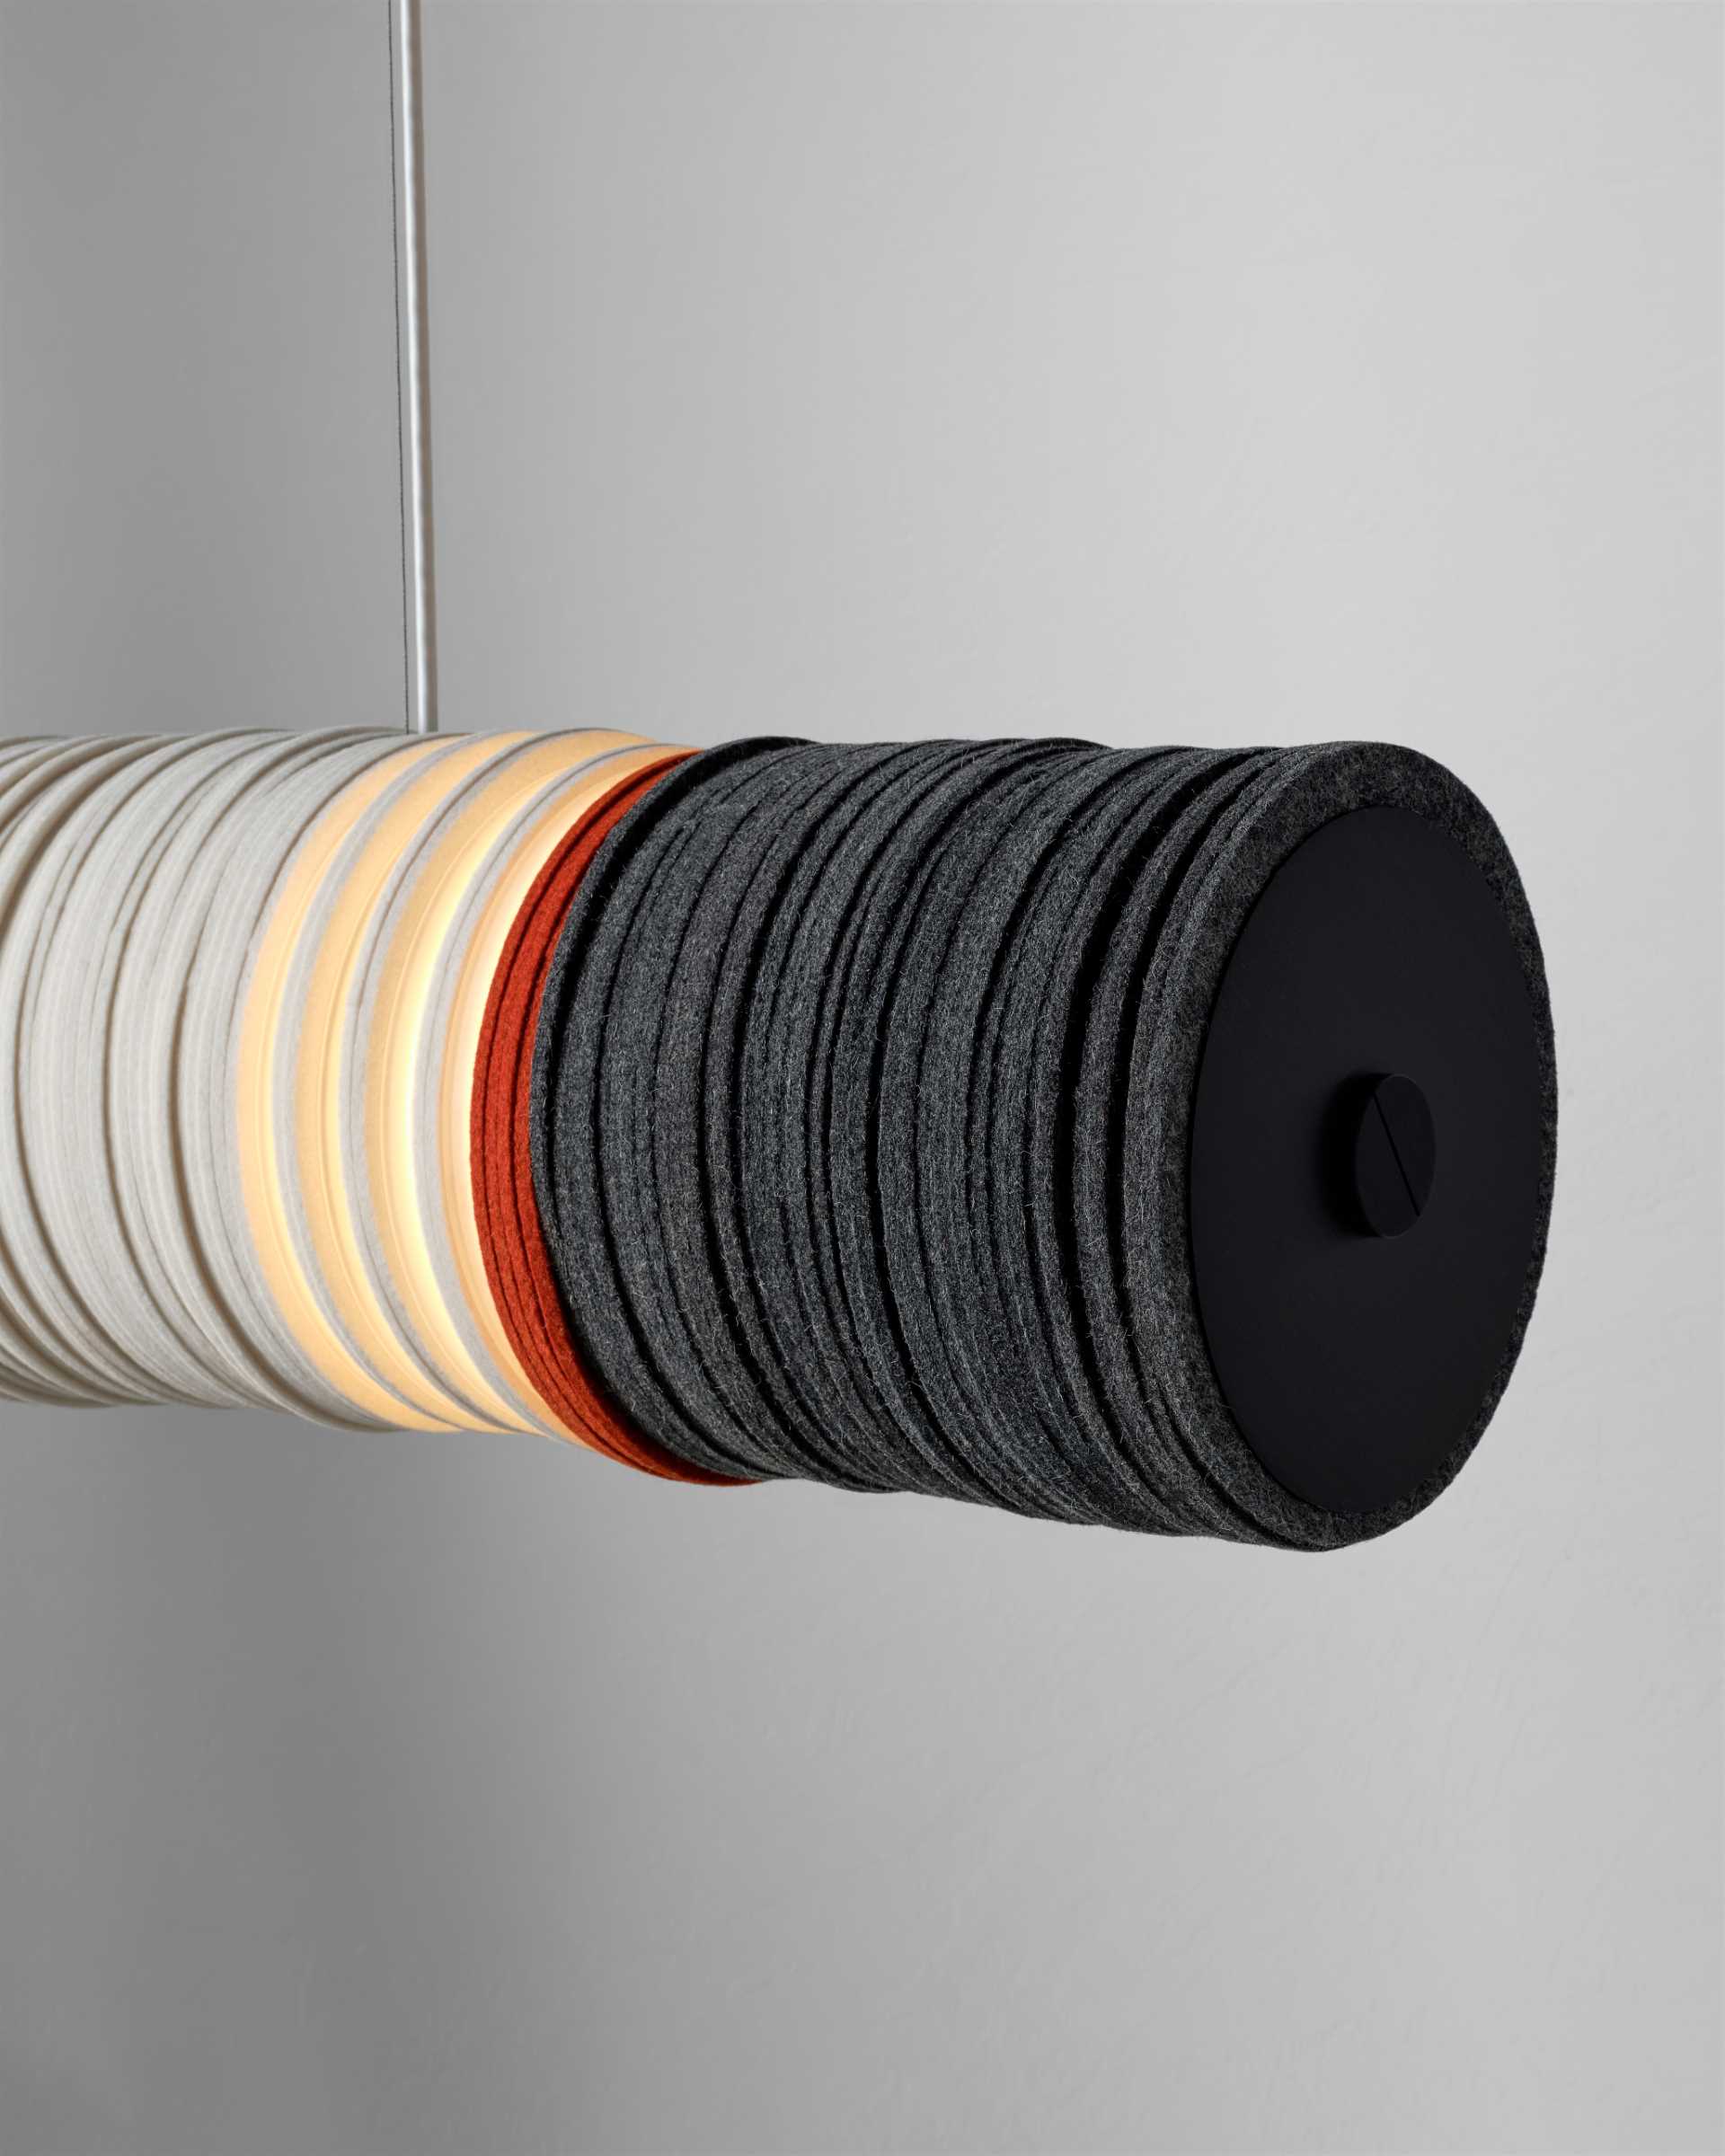 A modern lighting collection inspired by cigarettes, are made from upcycled felt and aluminum, and energy-saving LEDs.